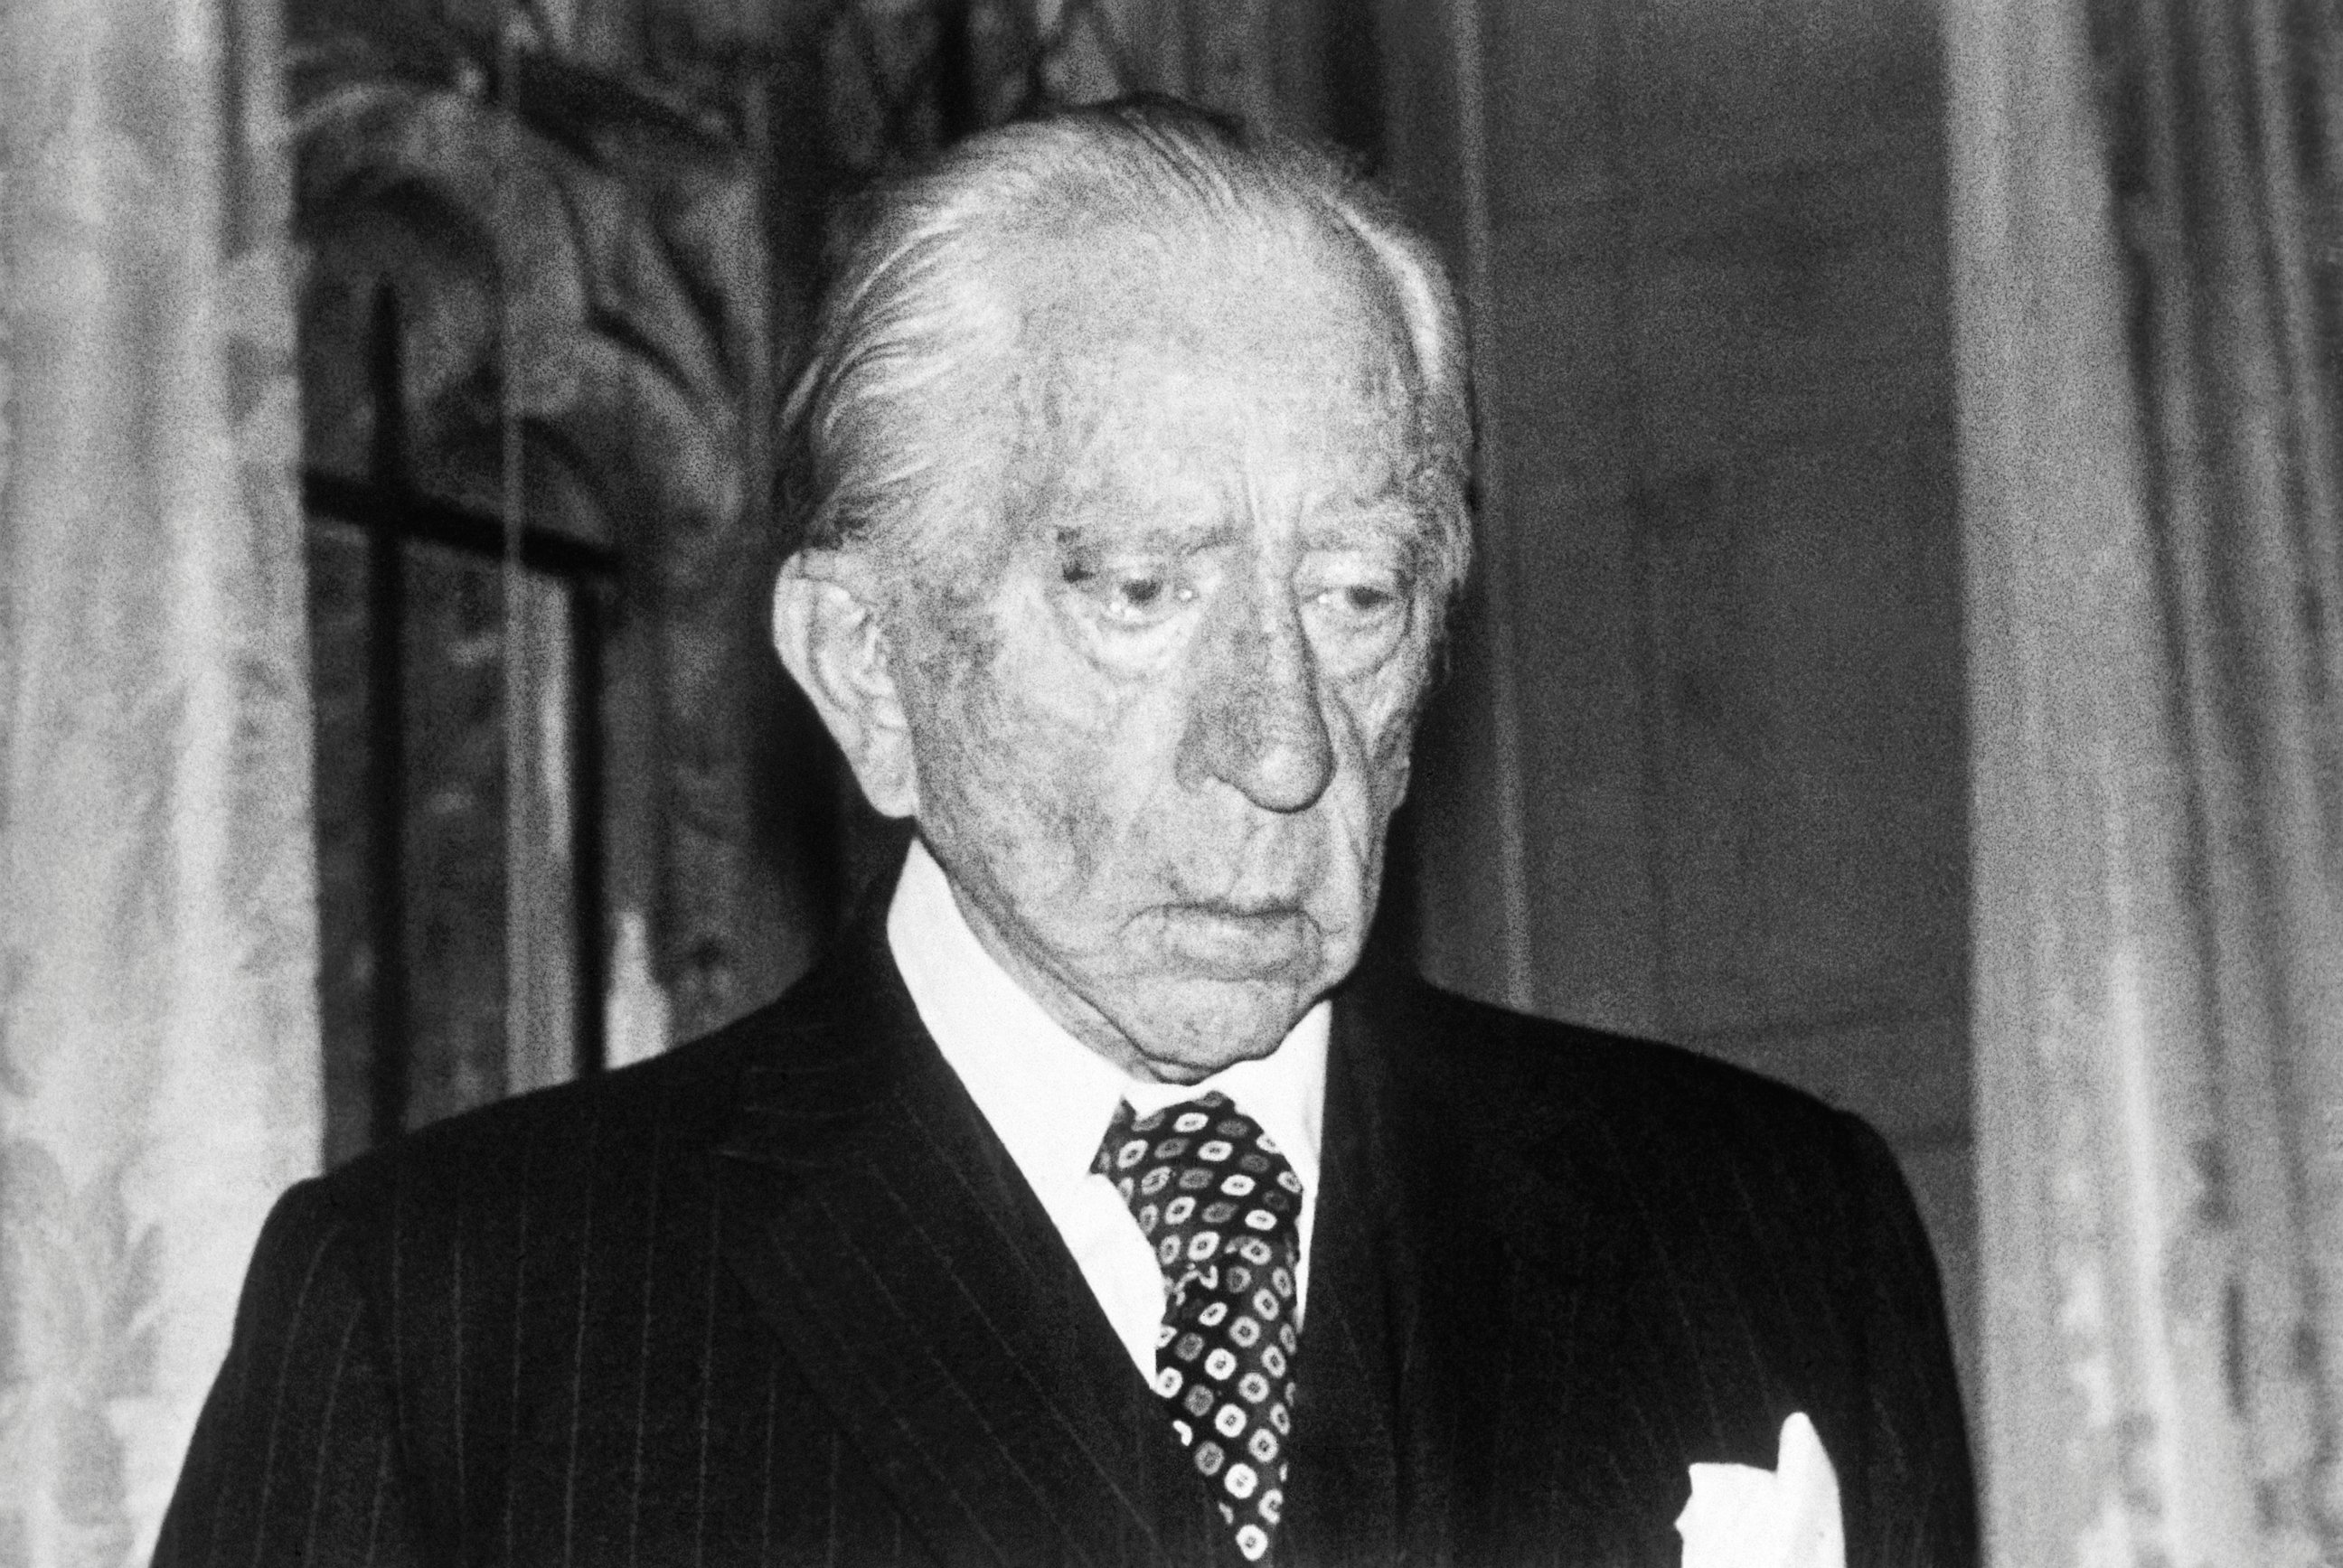 PHOTO: This 1975 file photo shows oil billionaire, Jean Paul Getty, America's richest expatriate, at his home at Guildford, Surrey, England.